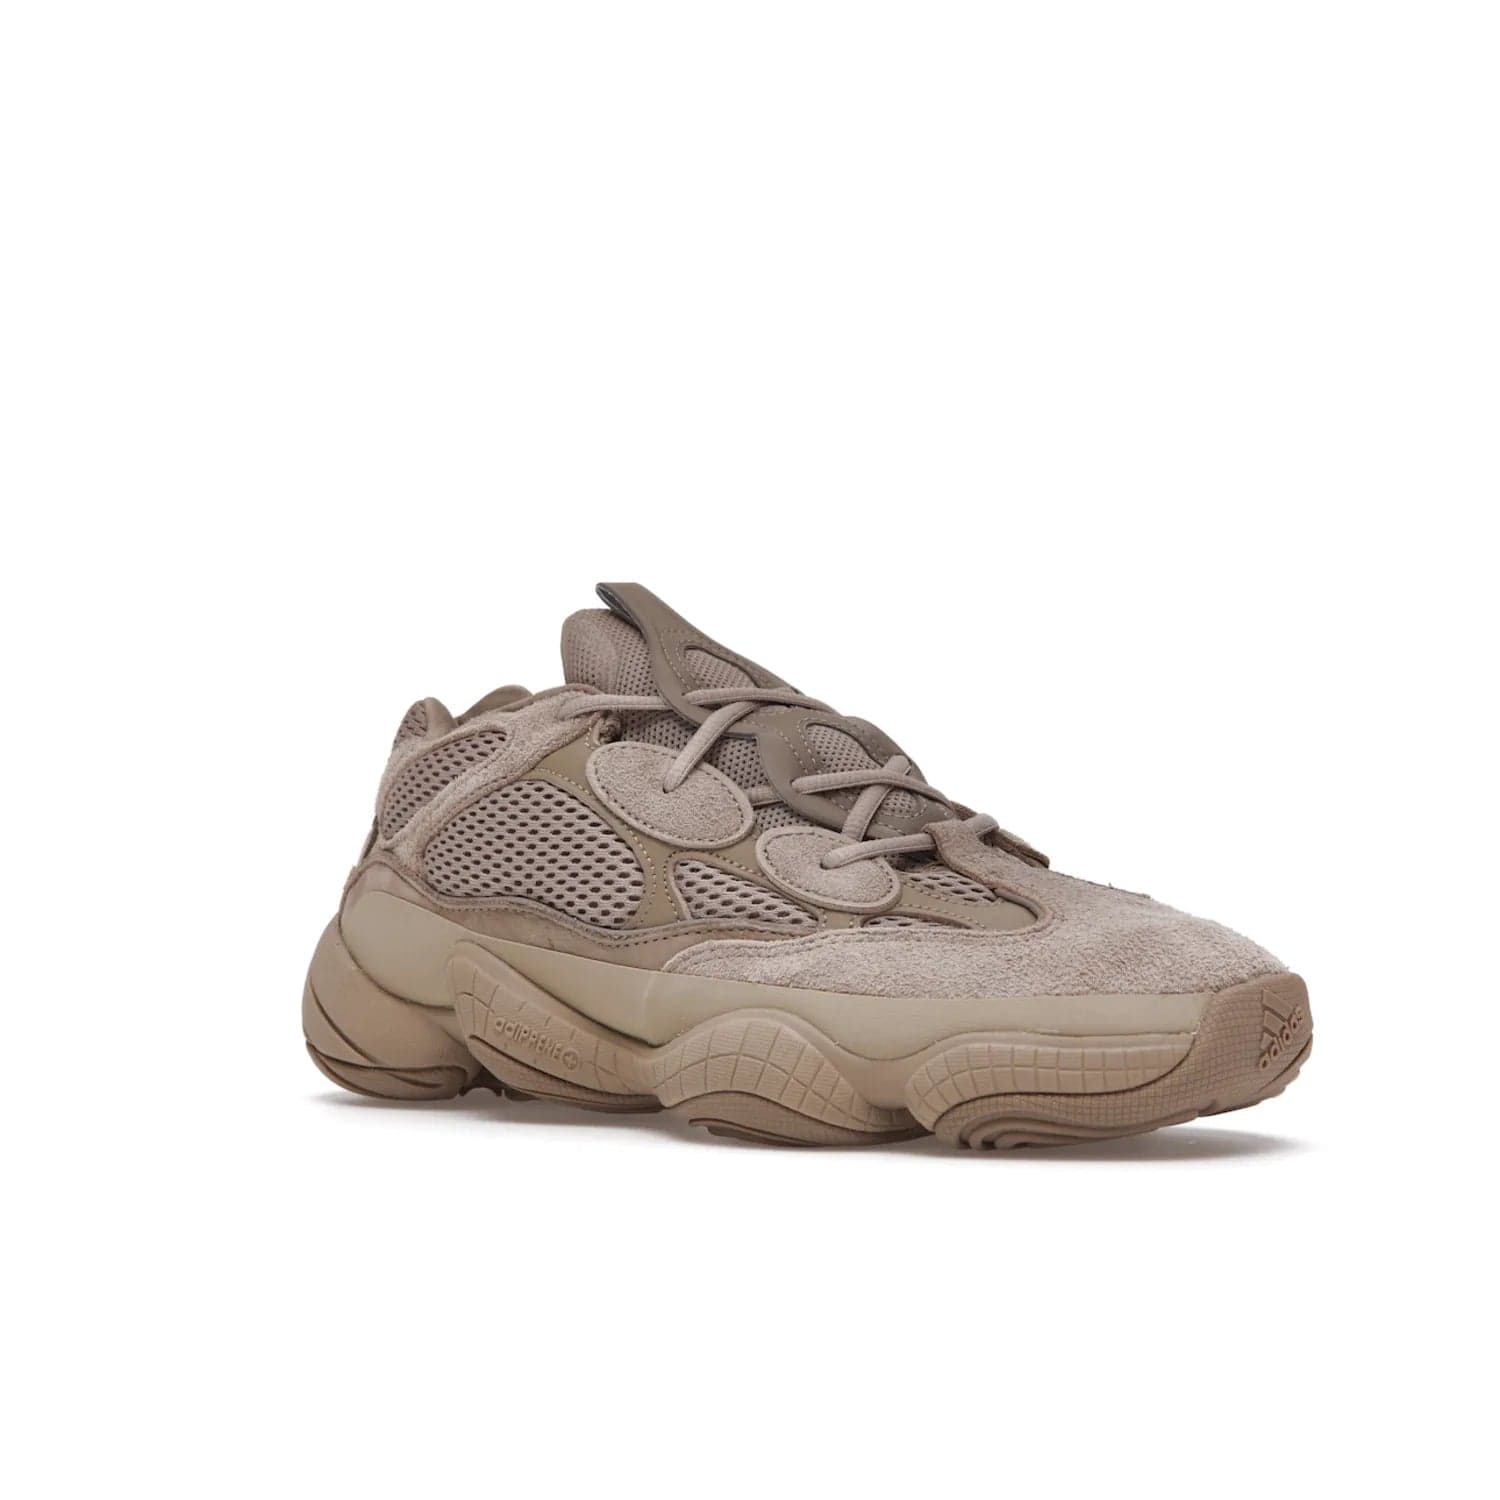 adidas Yeezy 500 Taupe Light - Image 5 - Only at www.BallersClubKickz.com - The adidas Yeezy 500 Taupe Light combines mesh, leather, and suede, with a durable adiPRENE sole for an eye-catching accessory. Reflective piping adds the perfect finishing touches to this unique silhouette. Ideal for any wardrobe, releasing in June 2021.